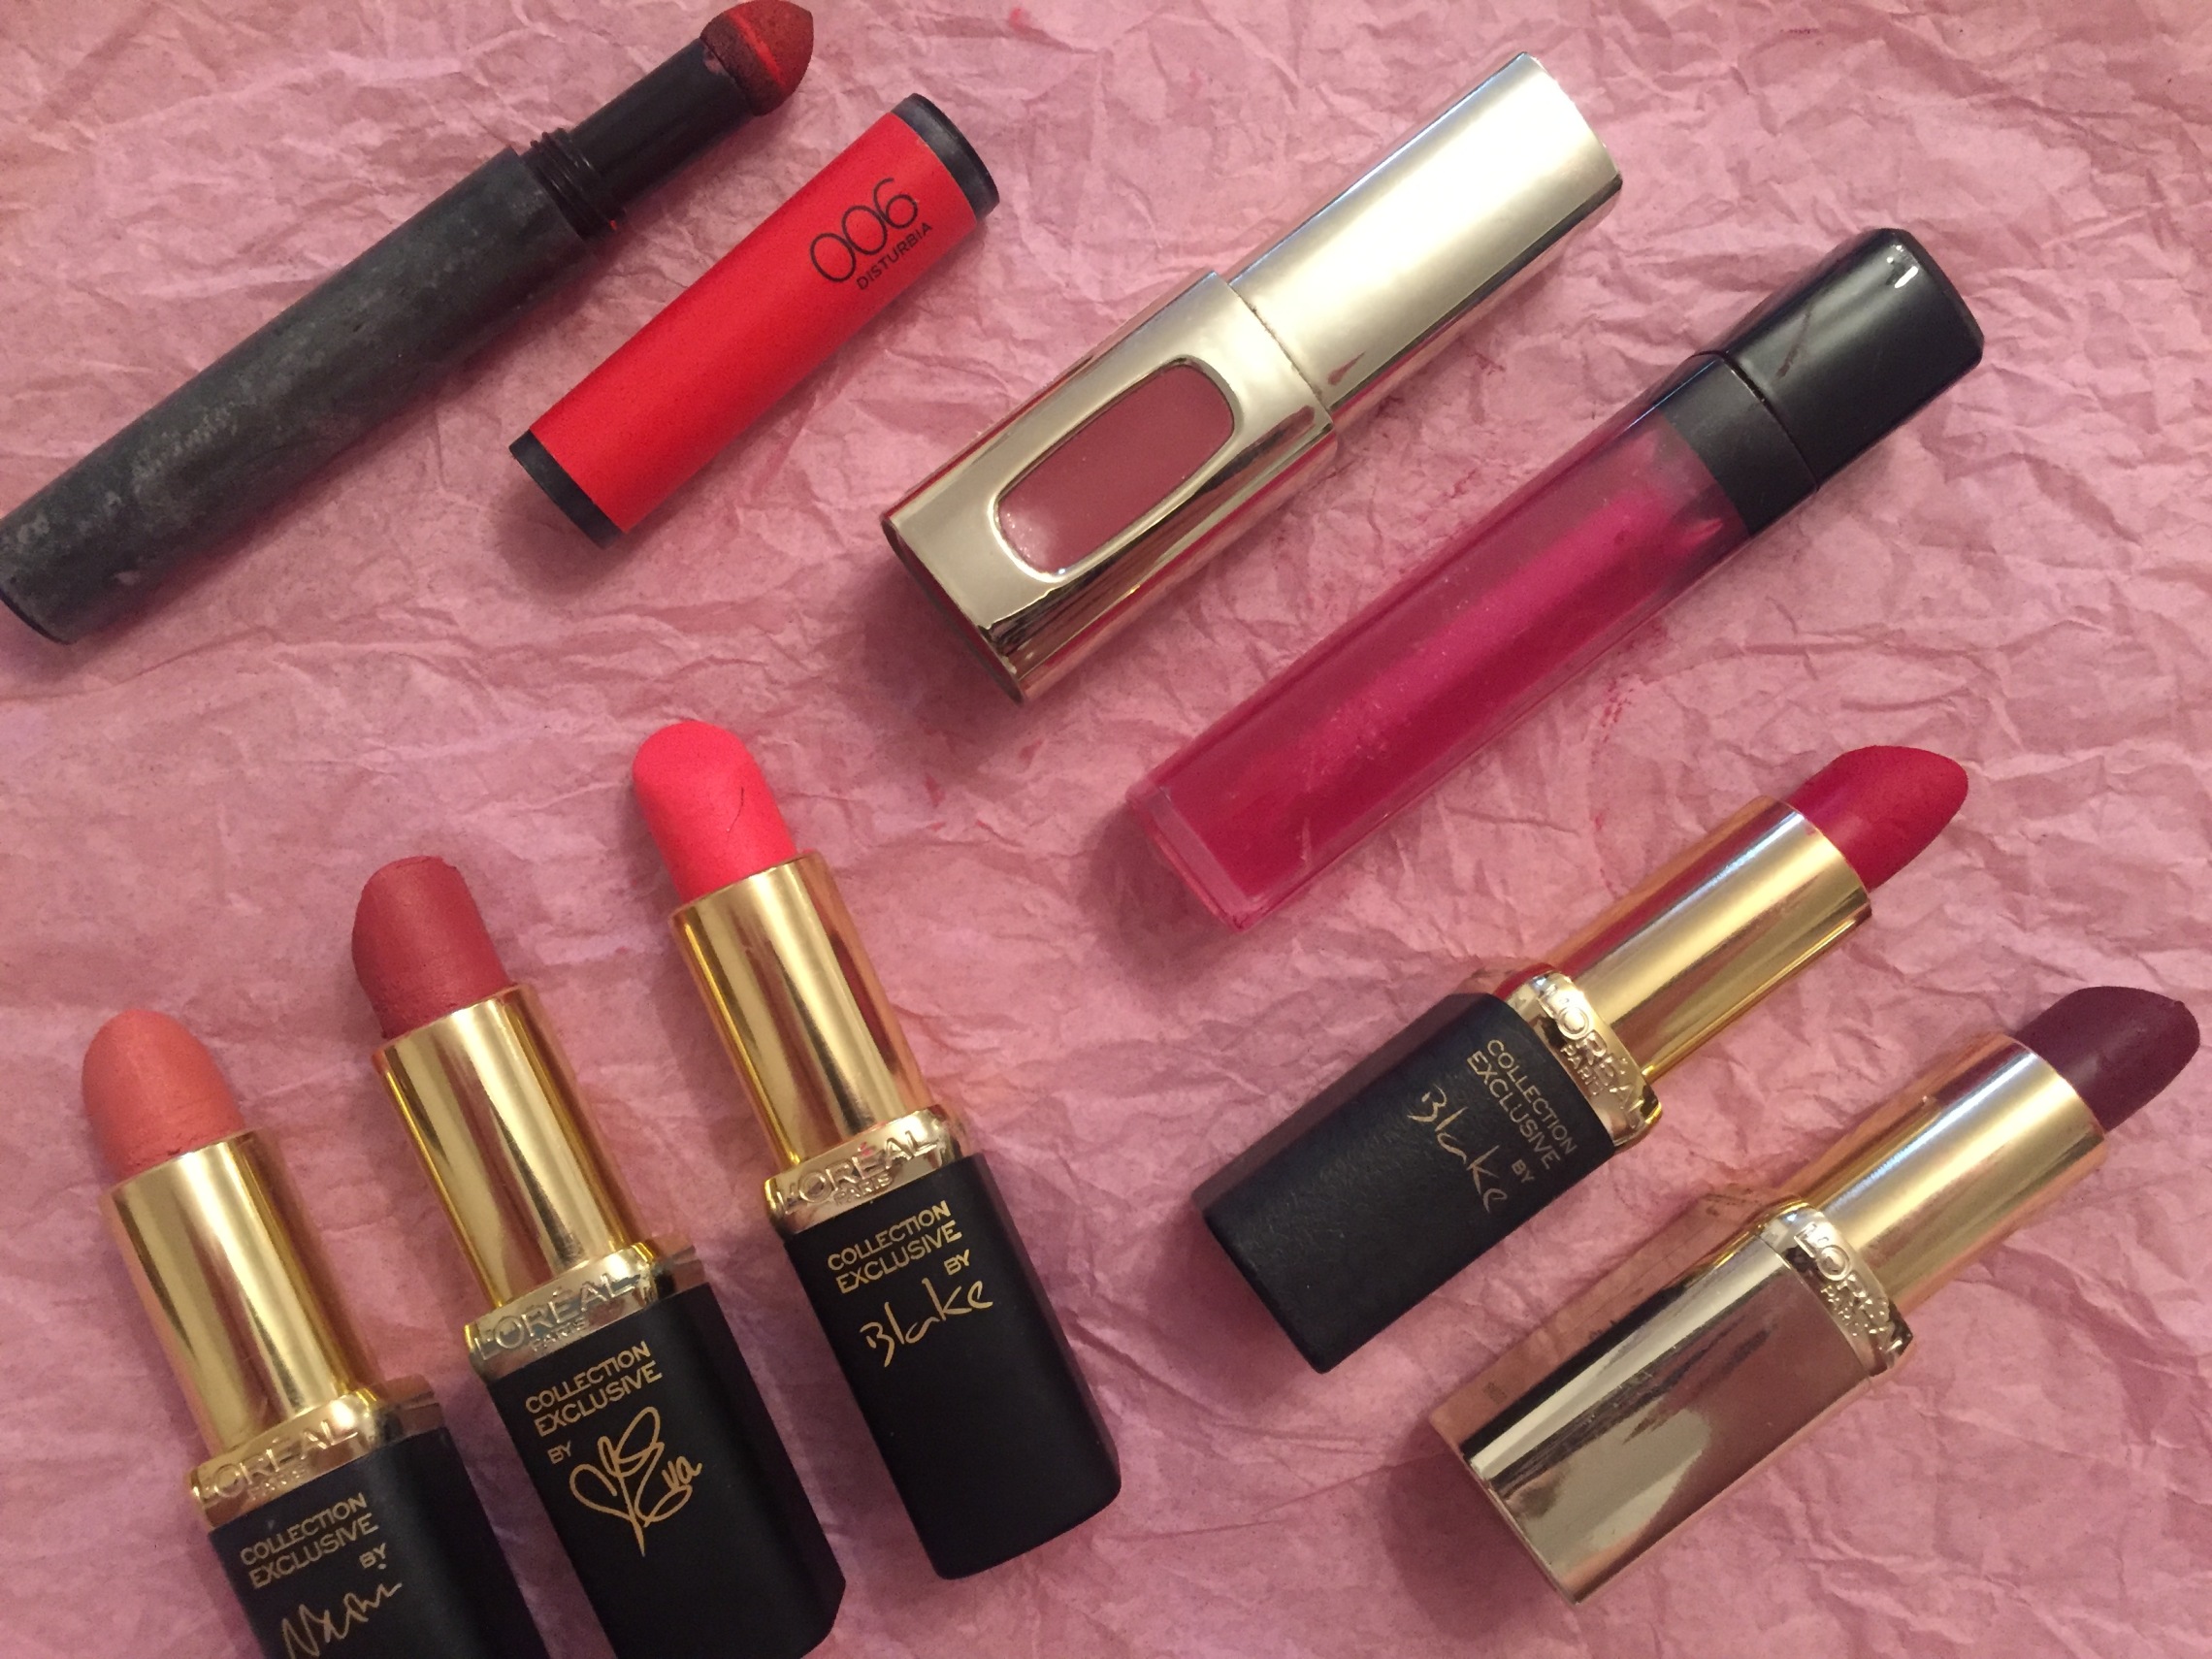 L’Oréal lipstick collection / Collection Exclusives – 50shad3s0fjay